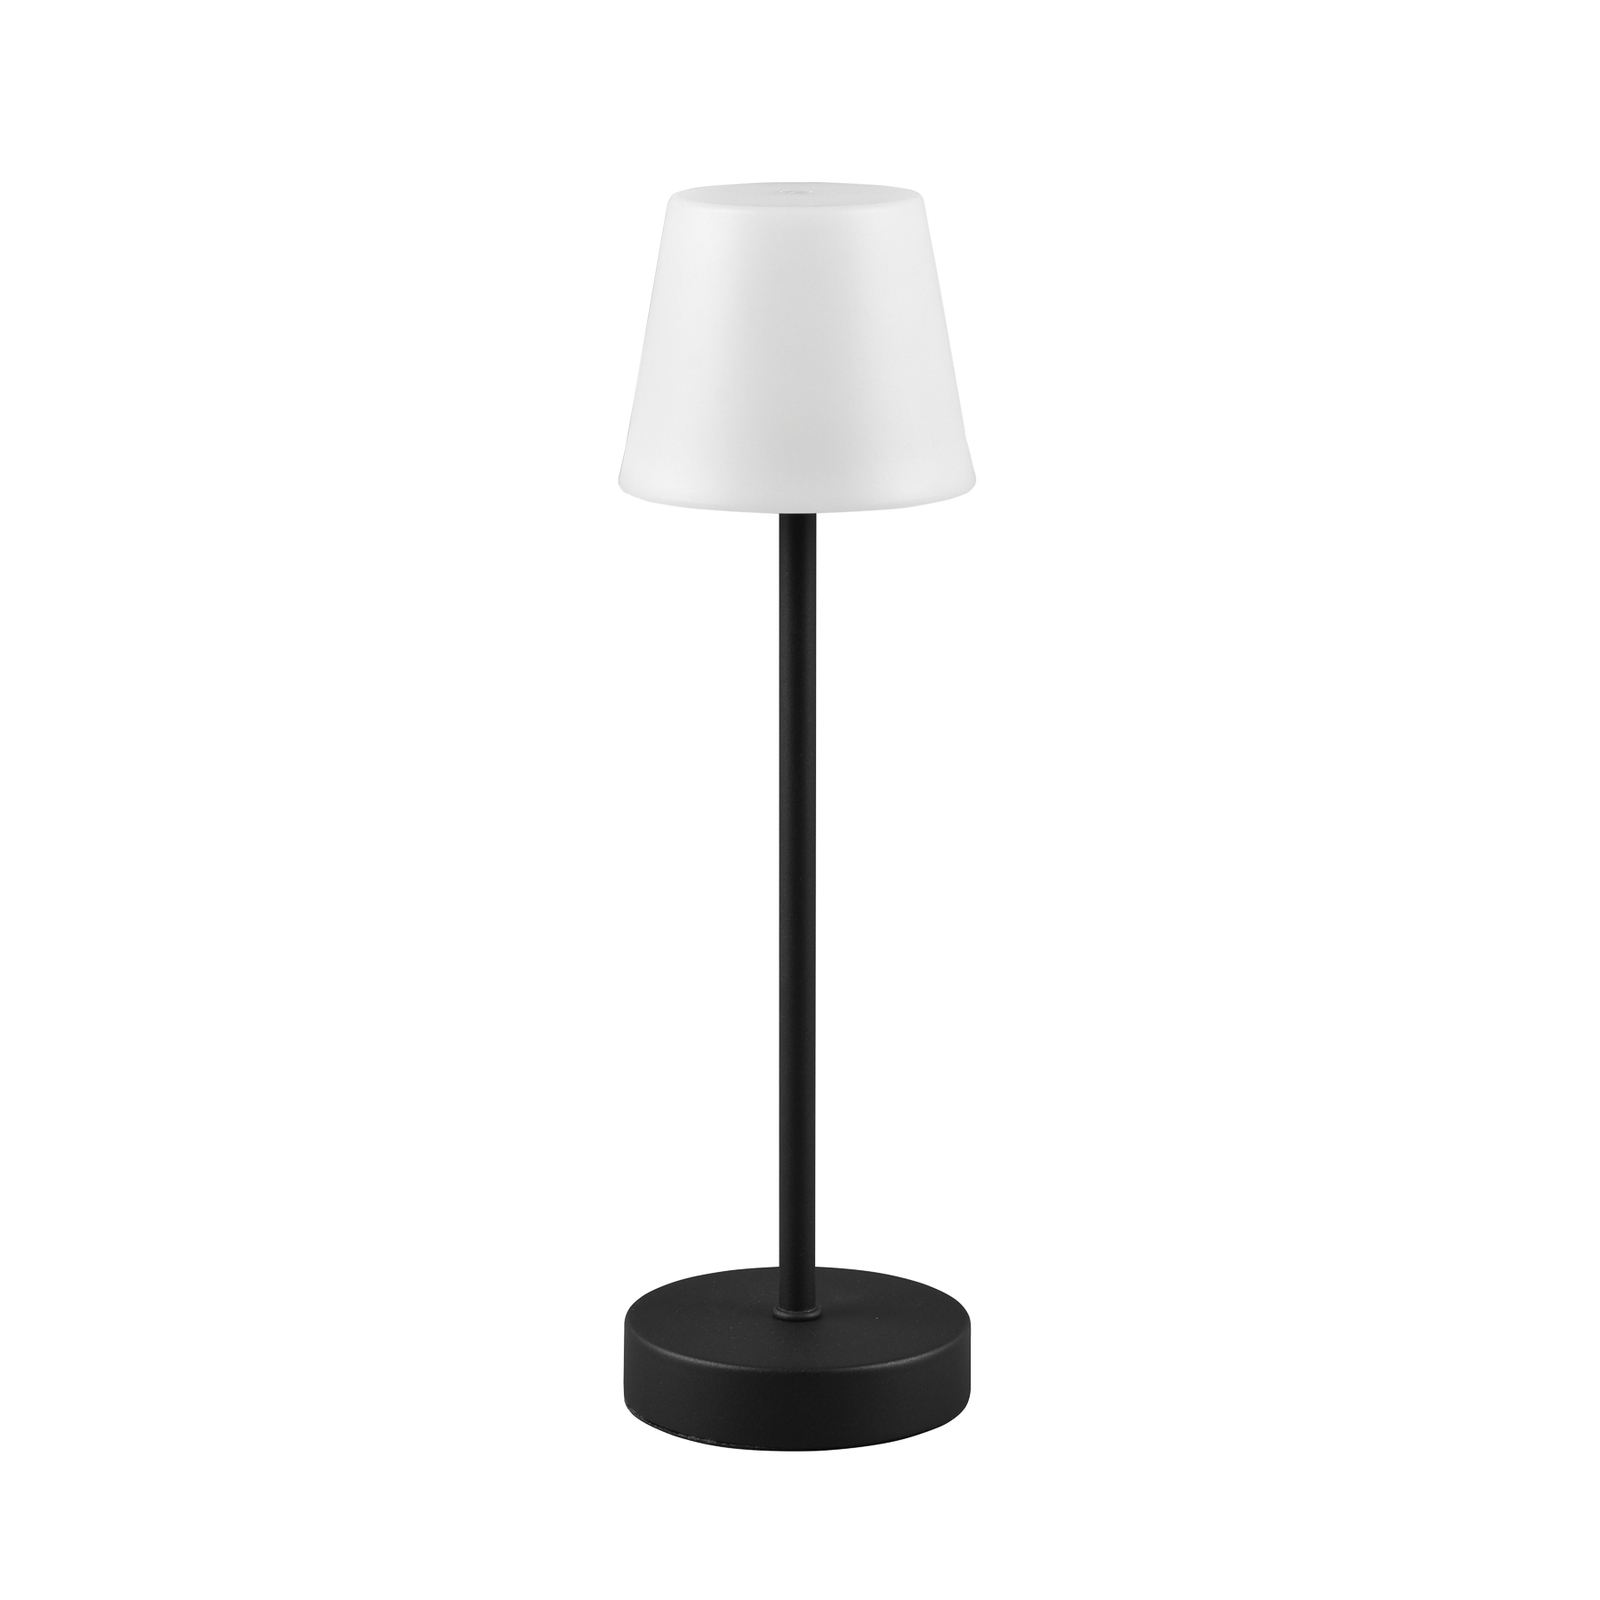 Martinez LED table lamp, dimmer and CCT, black